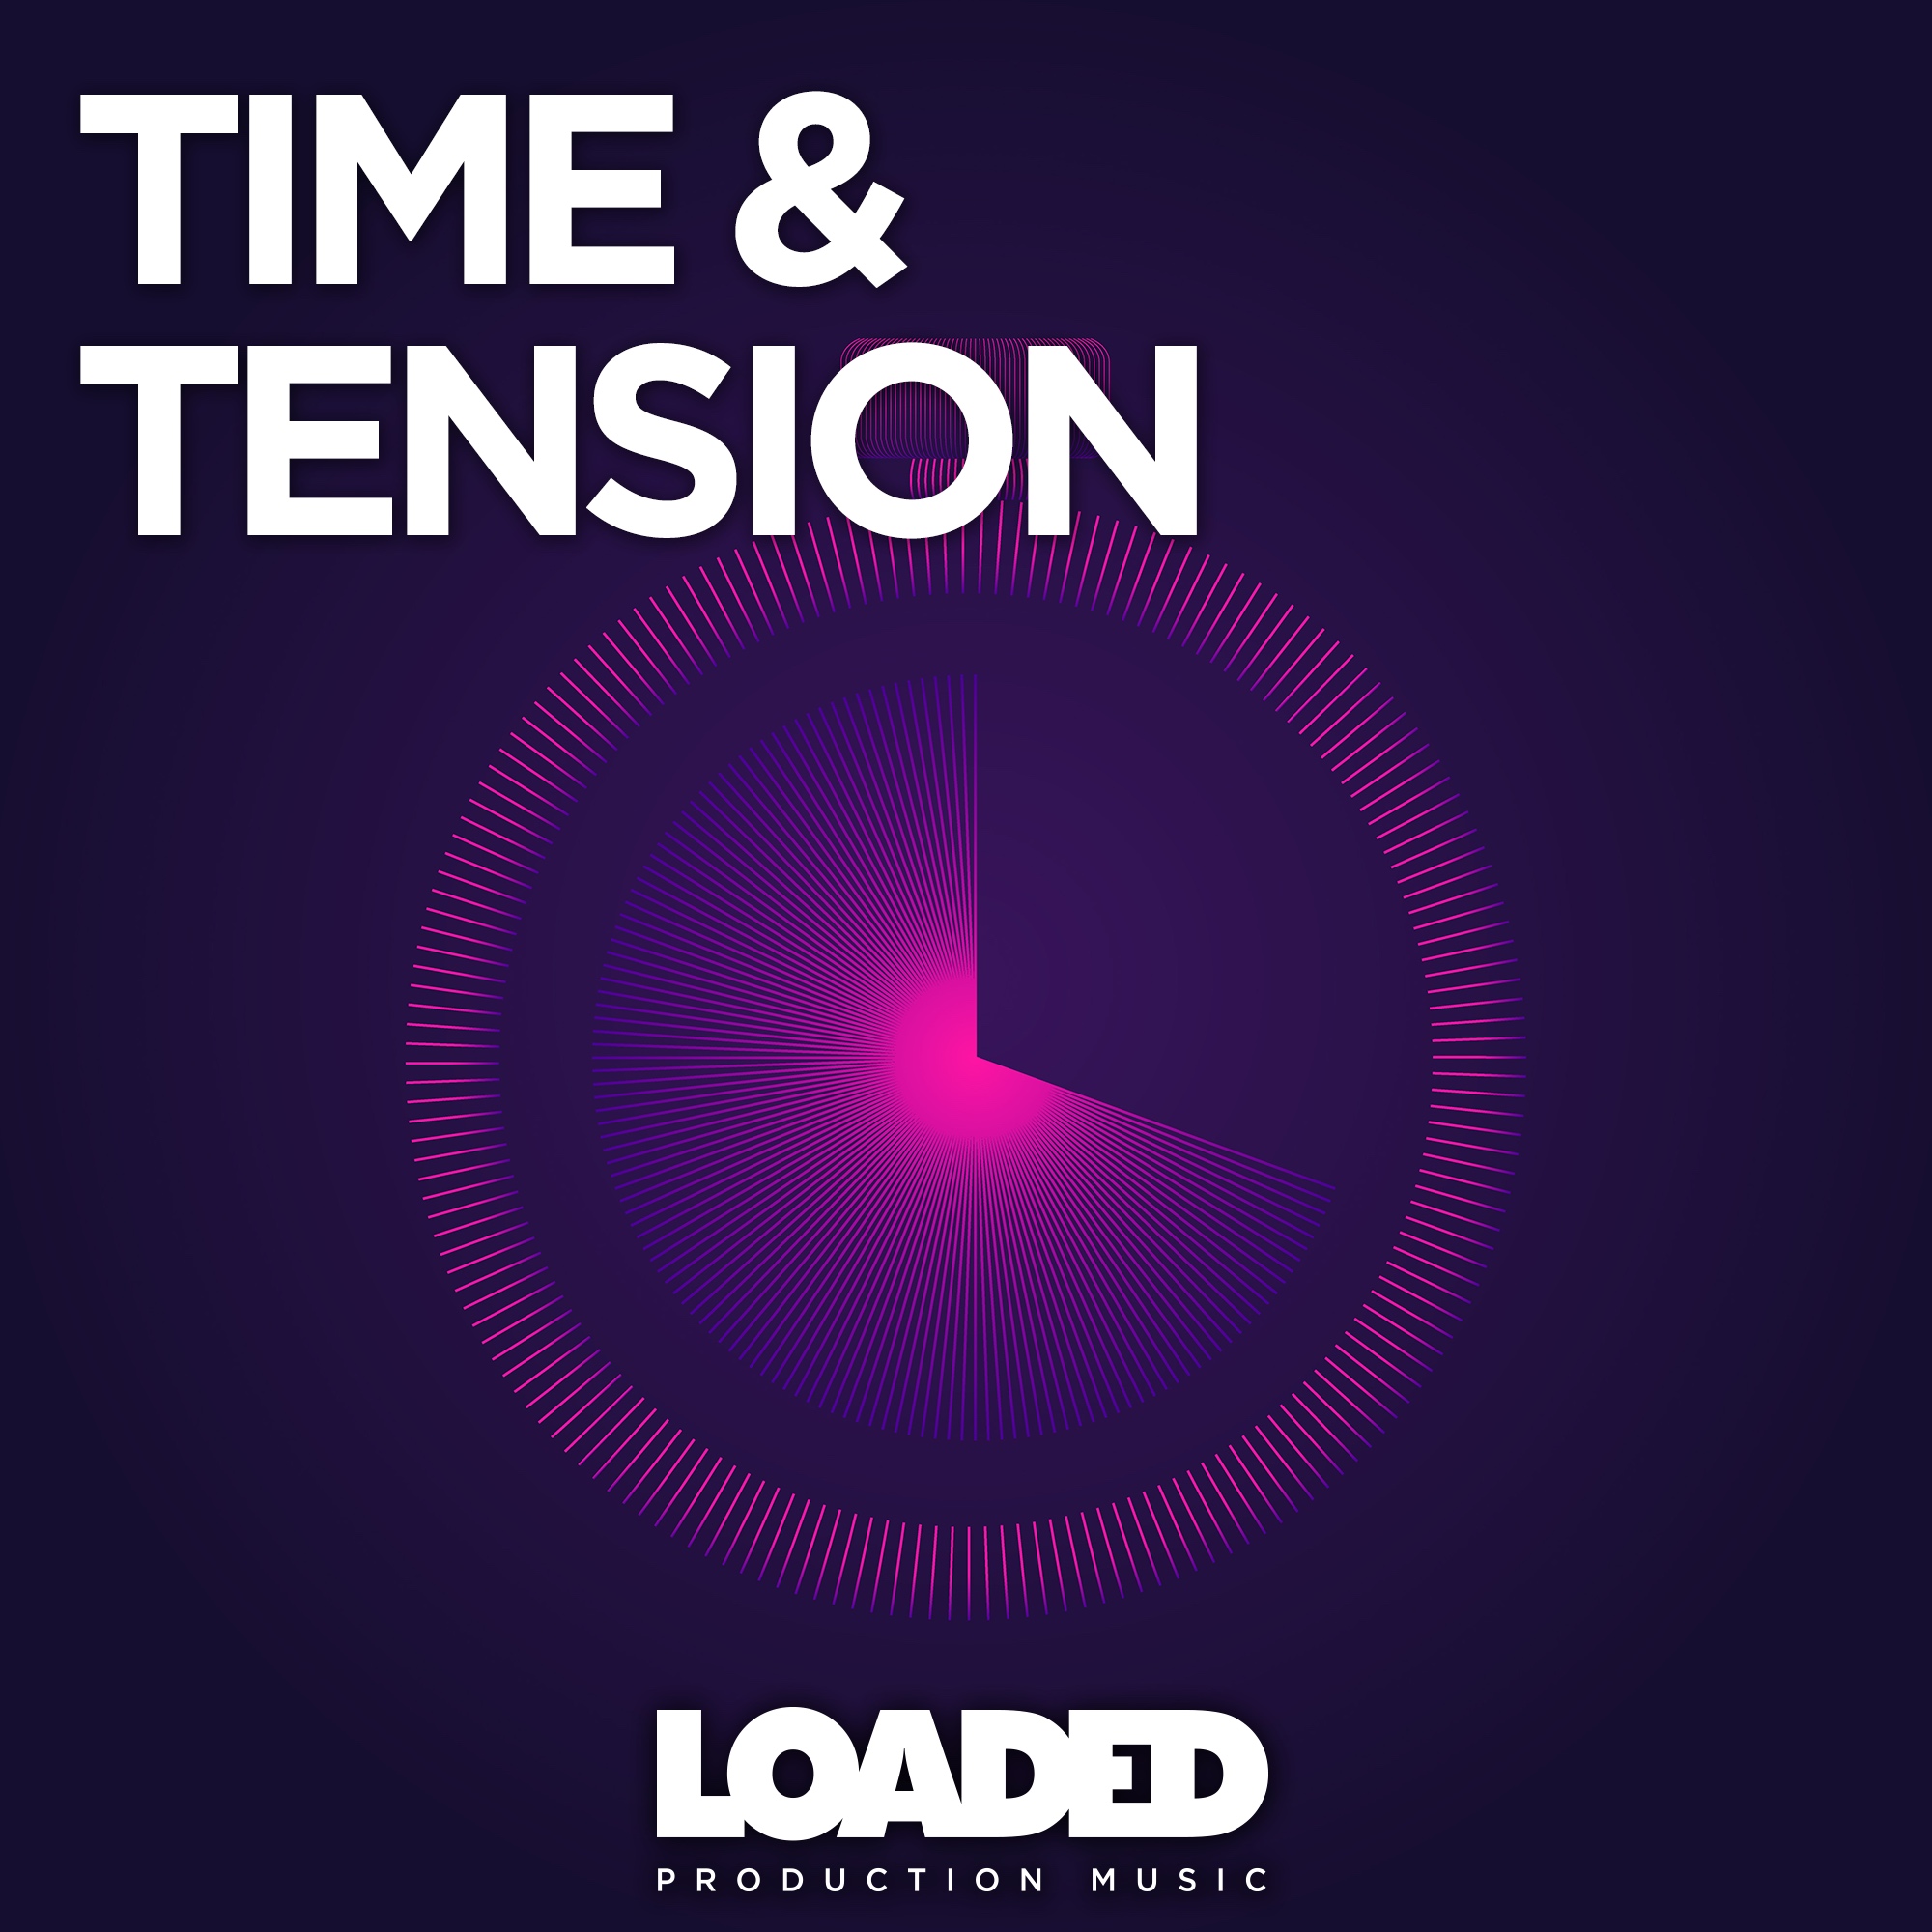 LPM 043 - Time and Tension - Album Cover